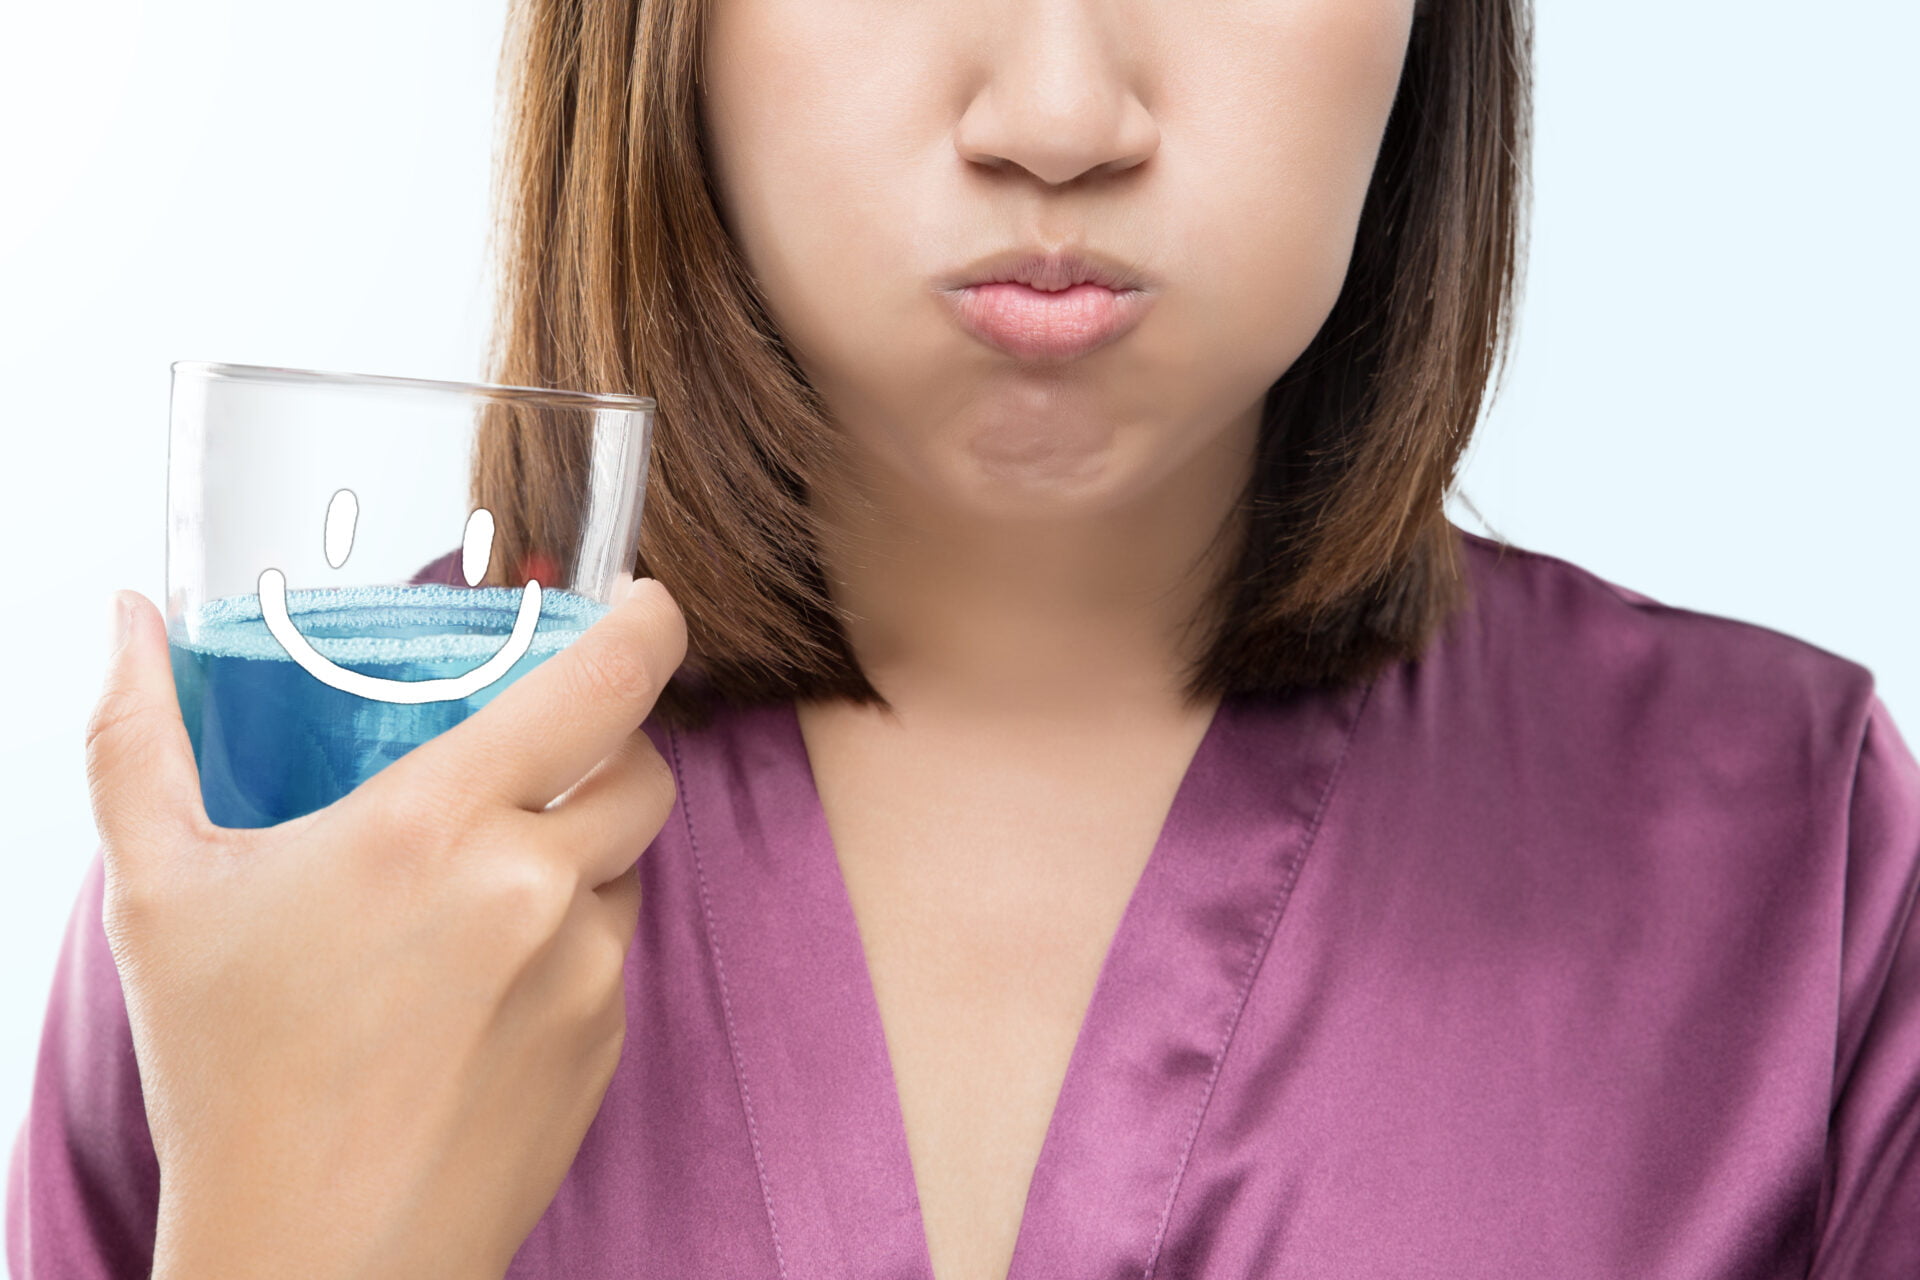 Asian woman rinsing and gargling while using mouthwash from a glass against gray background